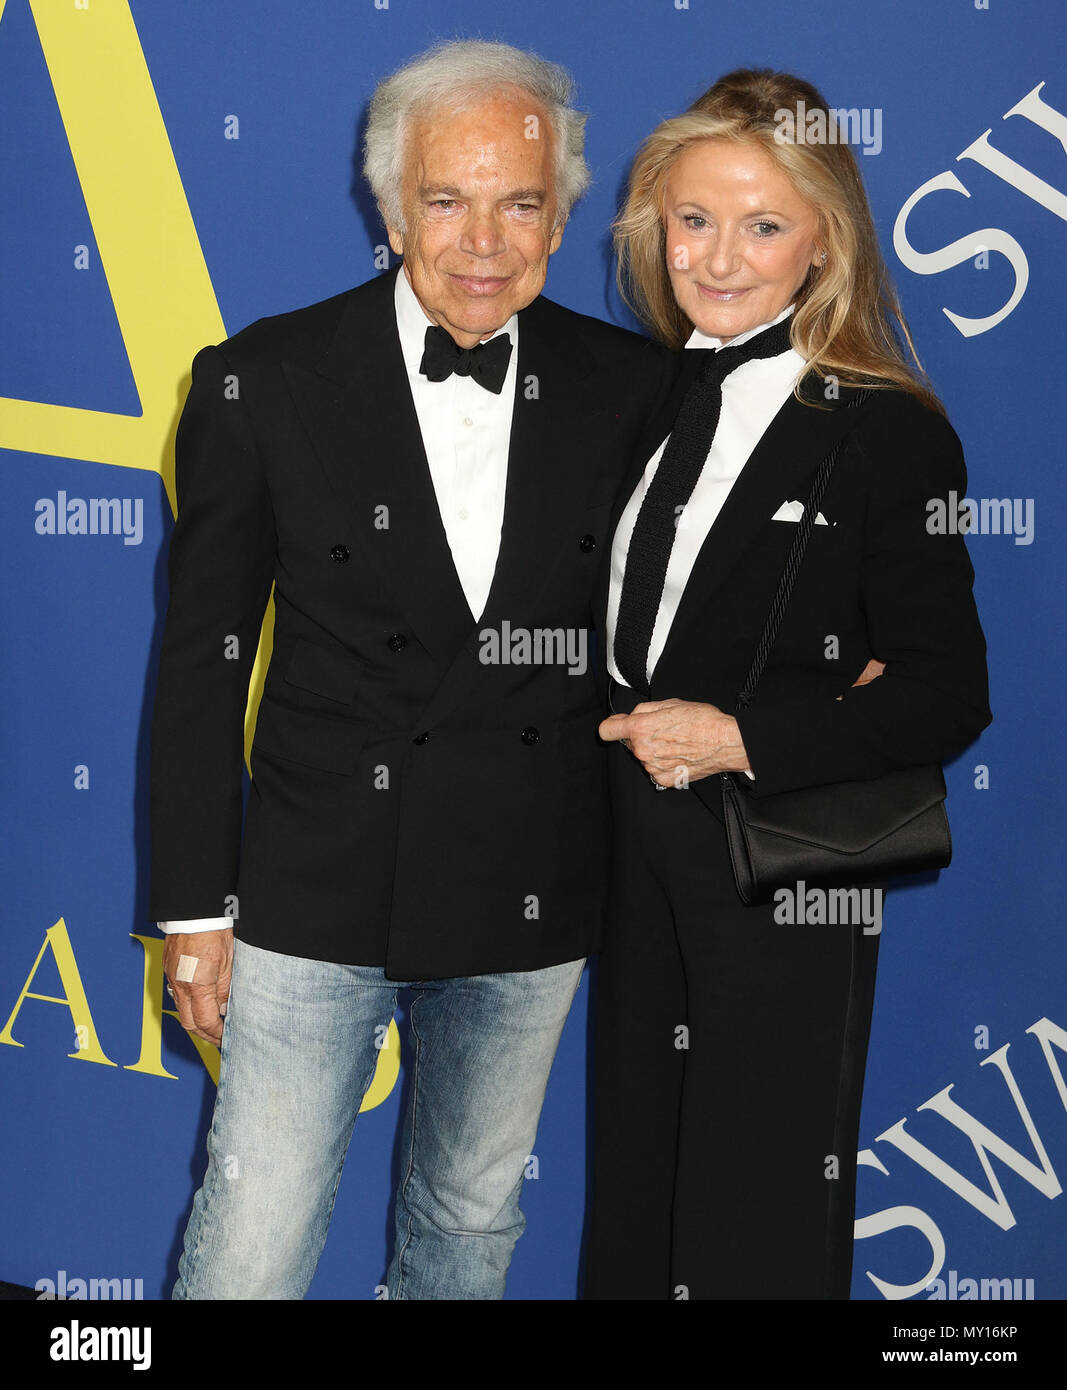 New York City, New York, USA. 4th June, 2018. Designer RALPH LAUREN and his  wife RICKY LAUREN attend the 2018 CFDA Fashion Awards held at the Brooklyn  Museum. Credit: Nancy Kaszerman/ZUMA Wire/Alamy